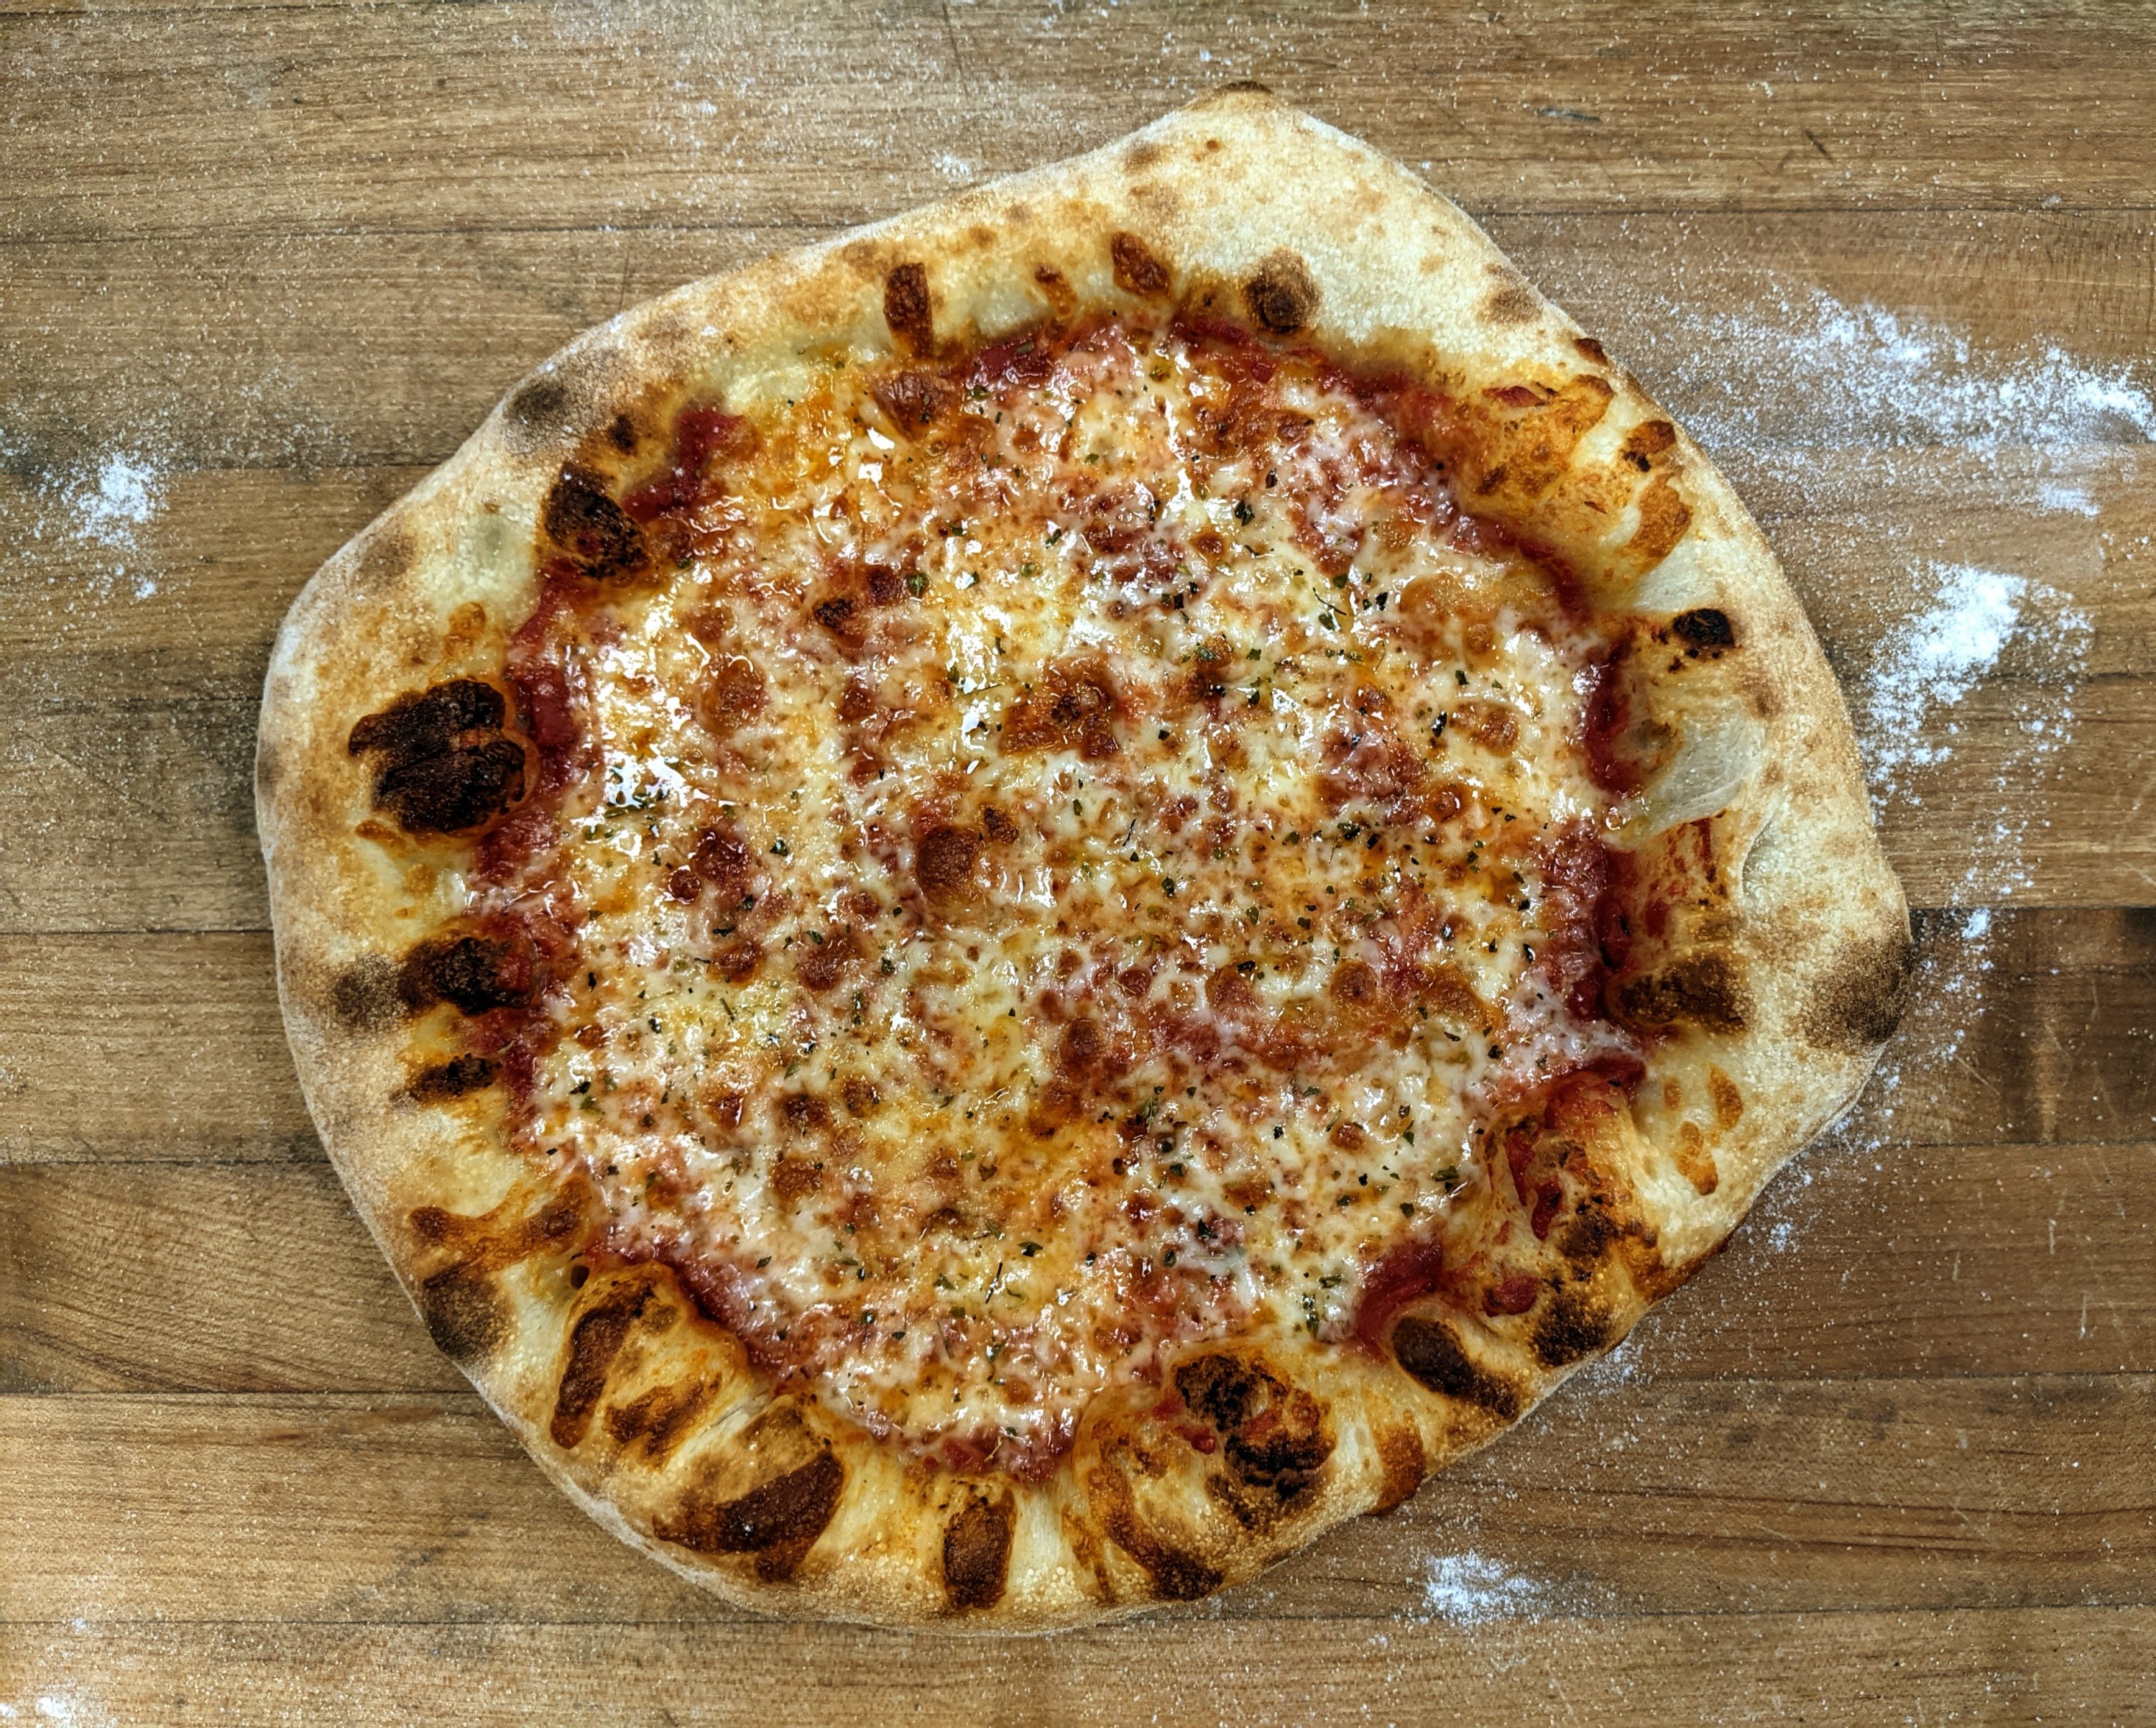 Barber's take on thin-crust, New York-style pizza.